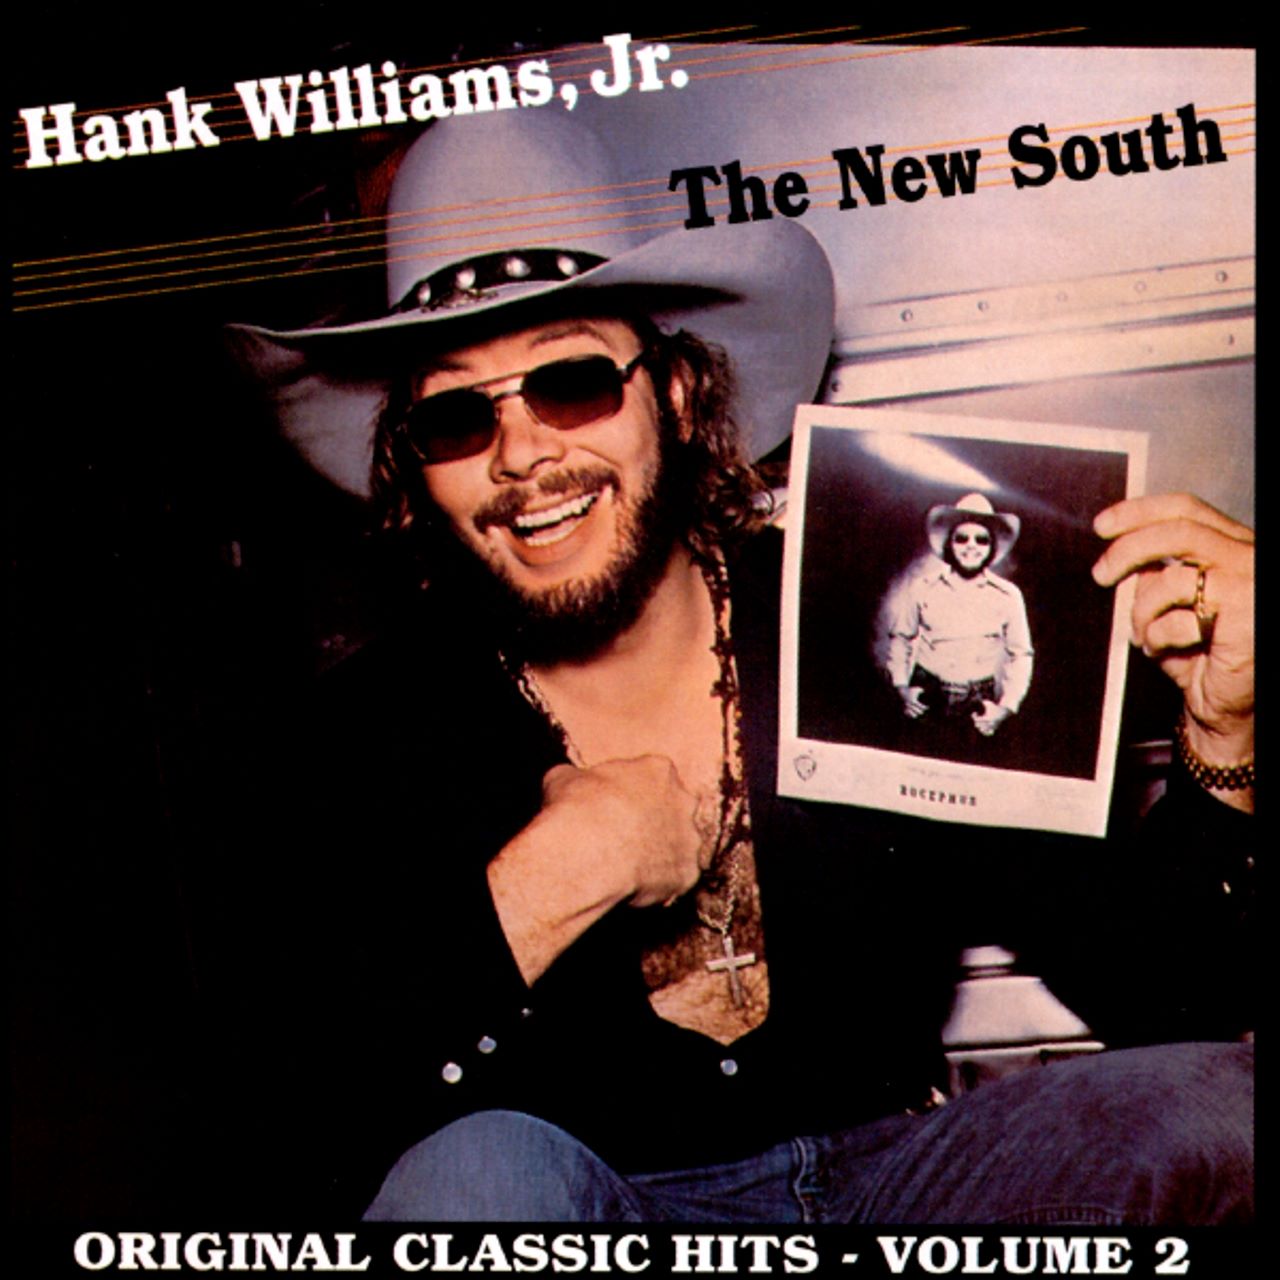 Hank Williams Jr. – The New South cover album